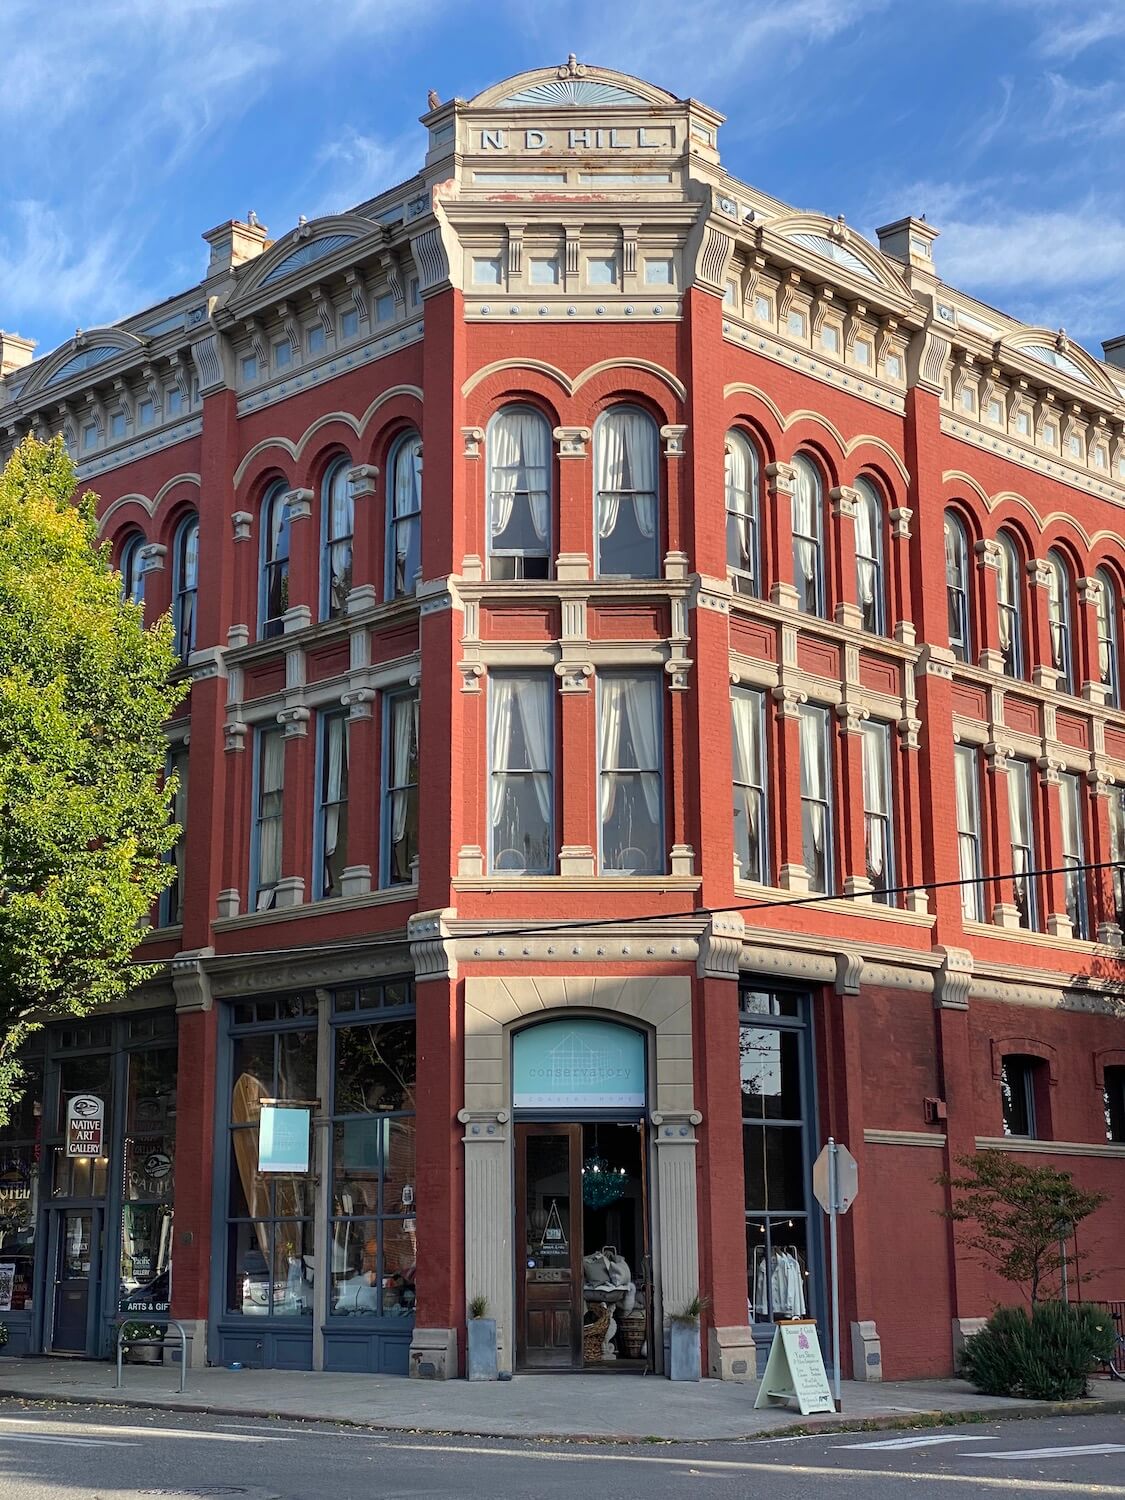 An ornate Victorian building is painted red brick and gray accents and sits under a blue sky. This is on Water Street in Downtown Port Townsend, Washington. A fun thing to do here is look at all the historic buildings.